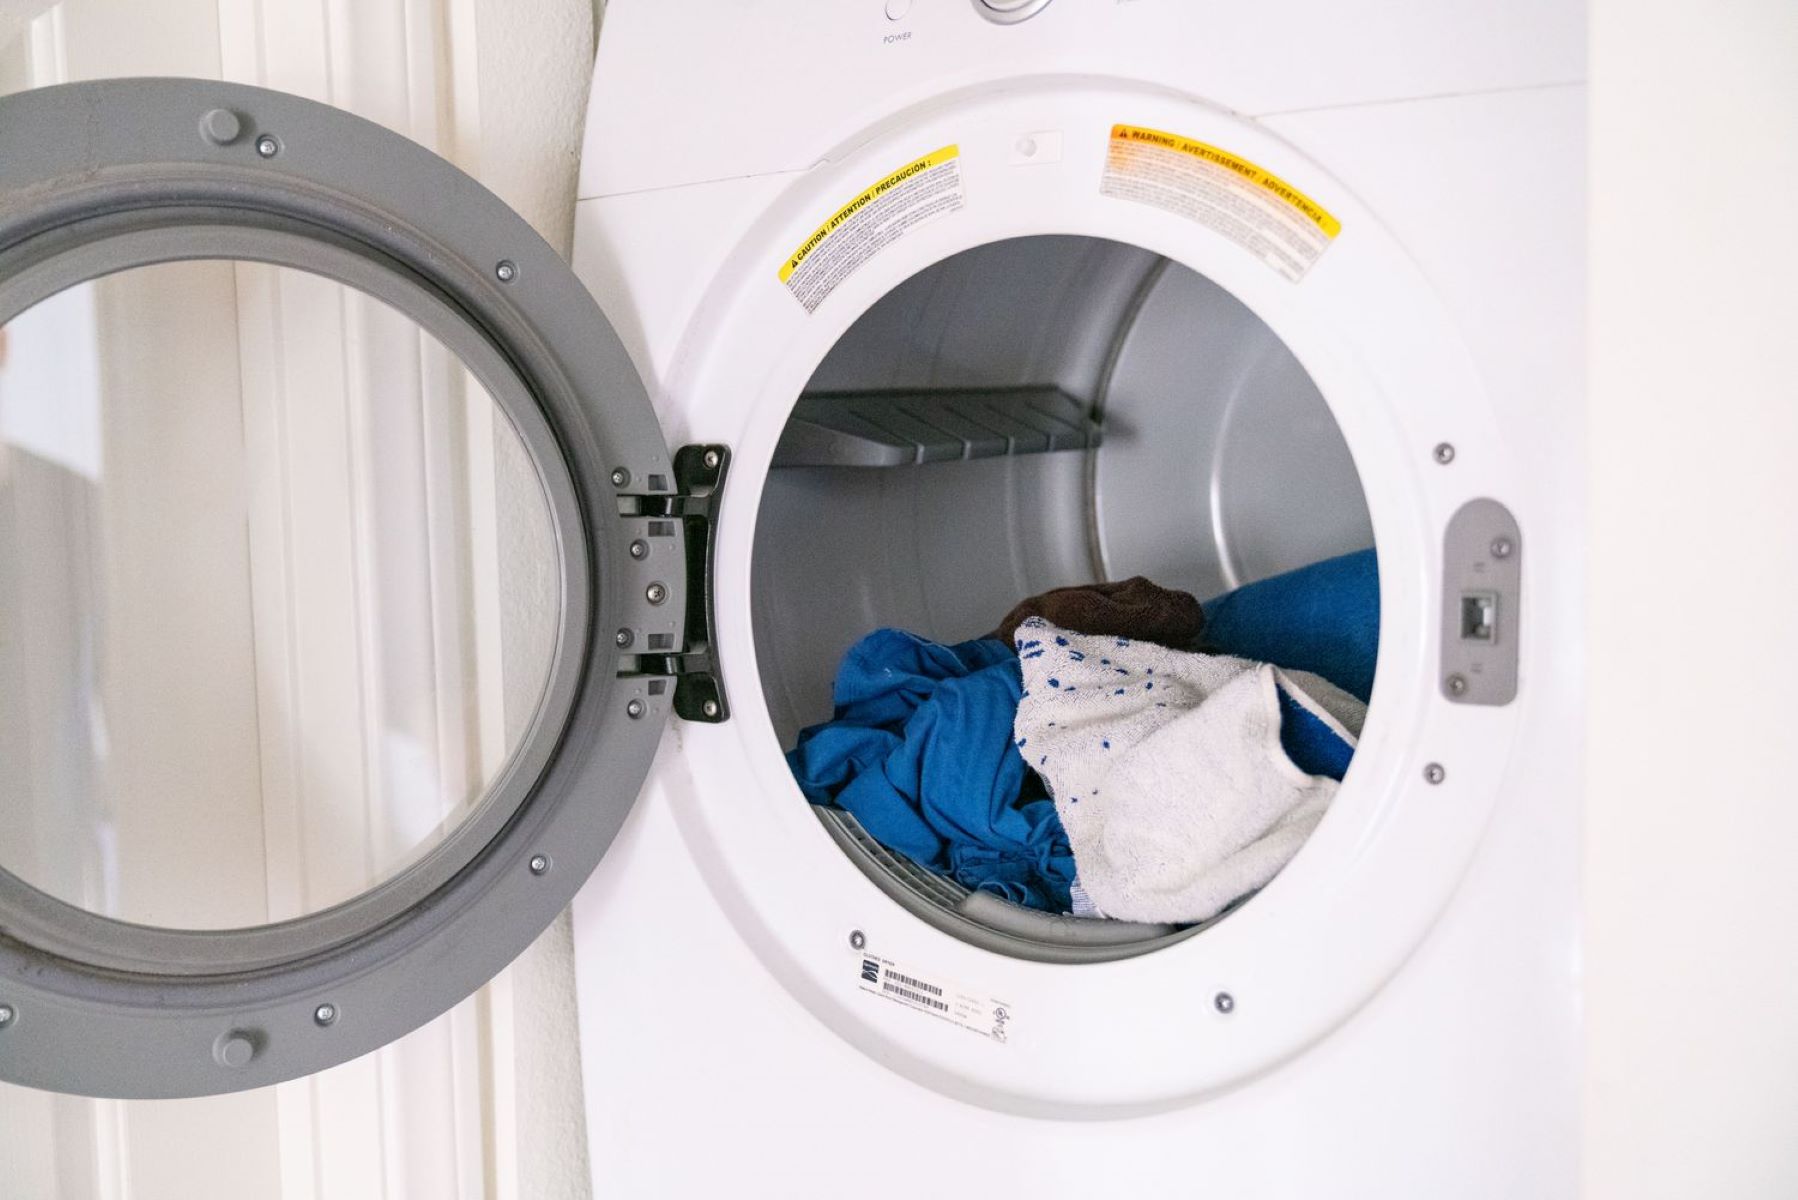 How To Fix The Error Code F42 For Whirlpool Dryer